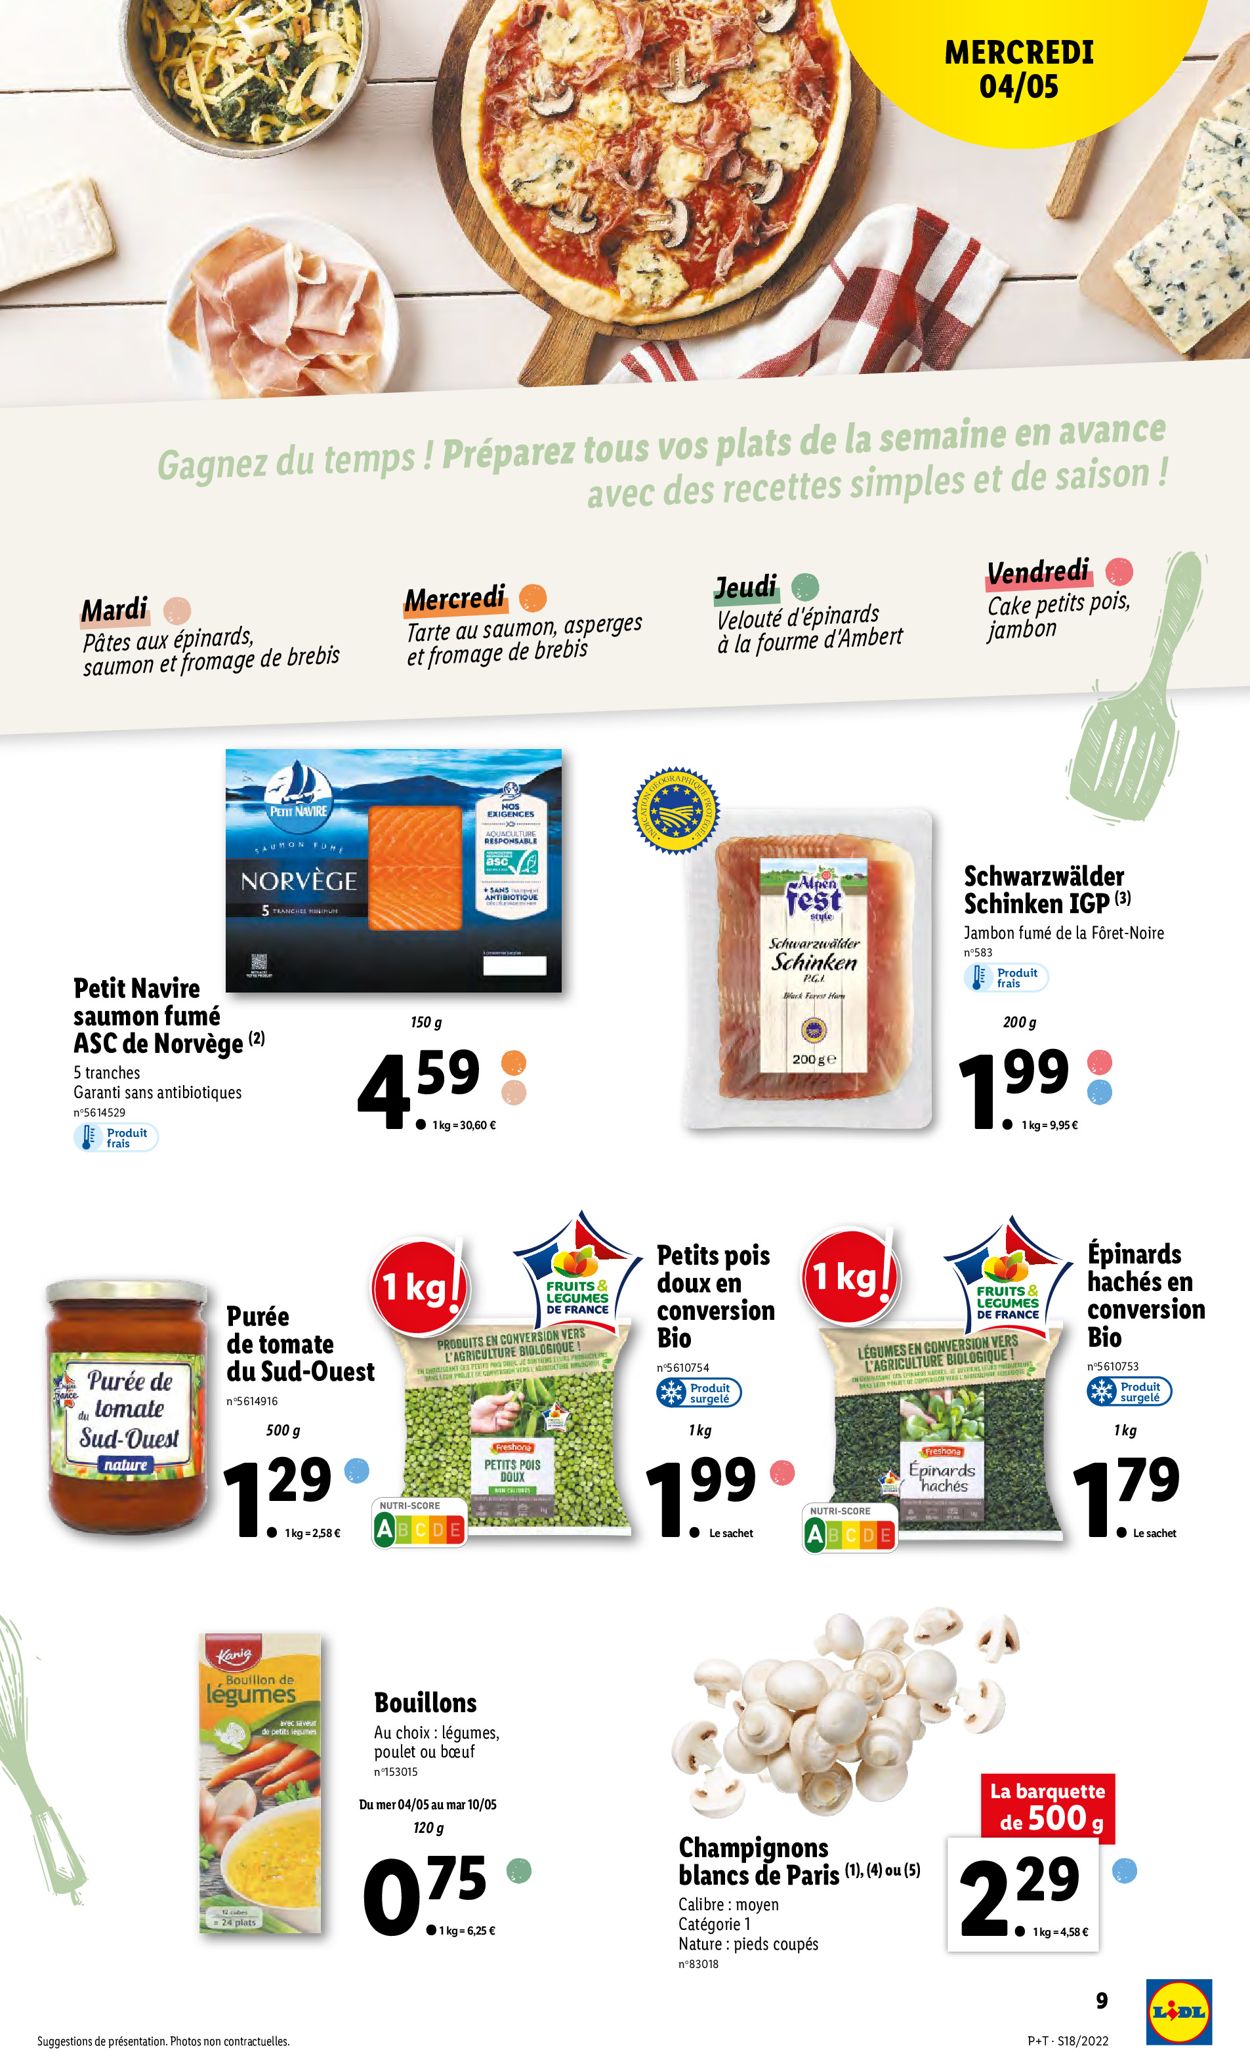 Lidl Catalogue - 04.05-10.05.2022 (Page 9)